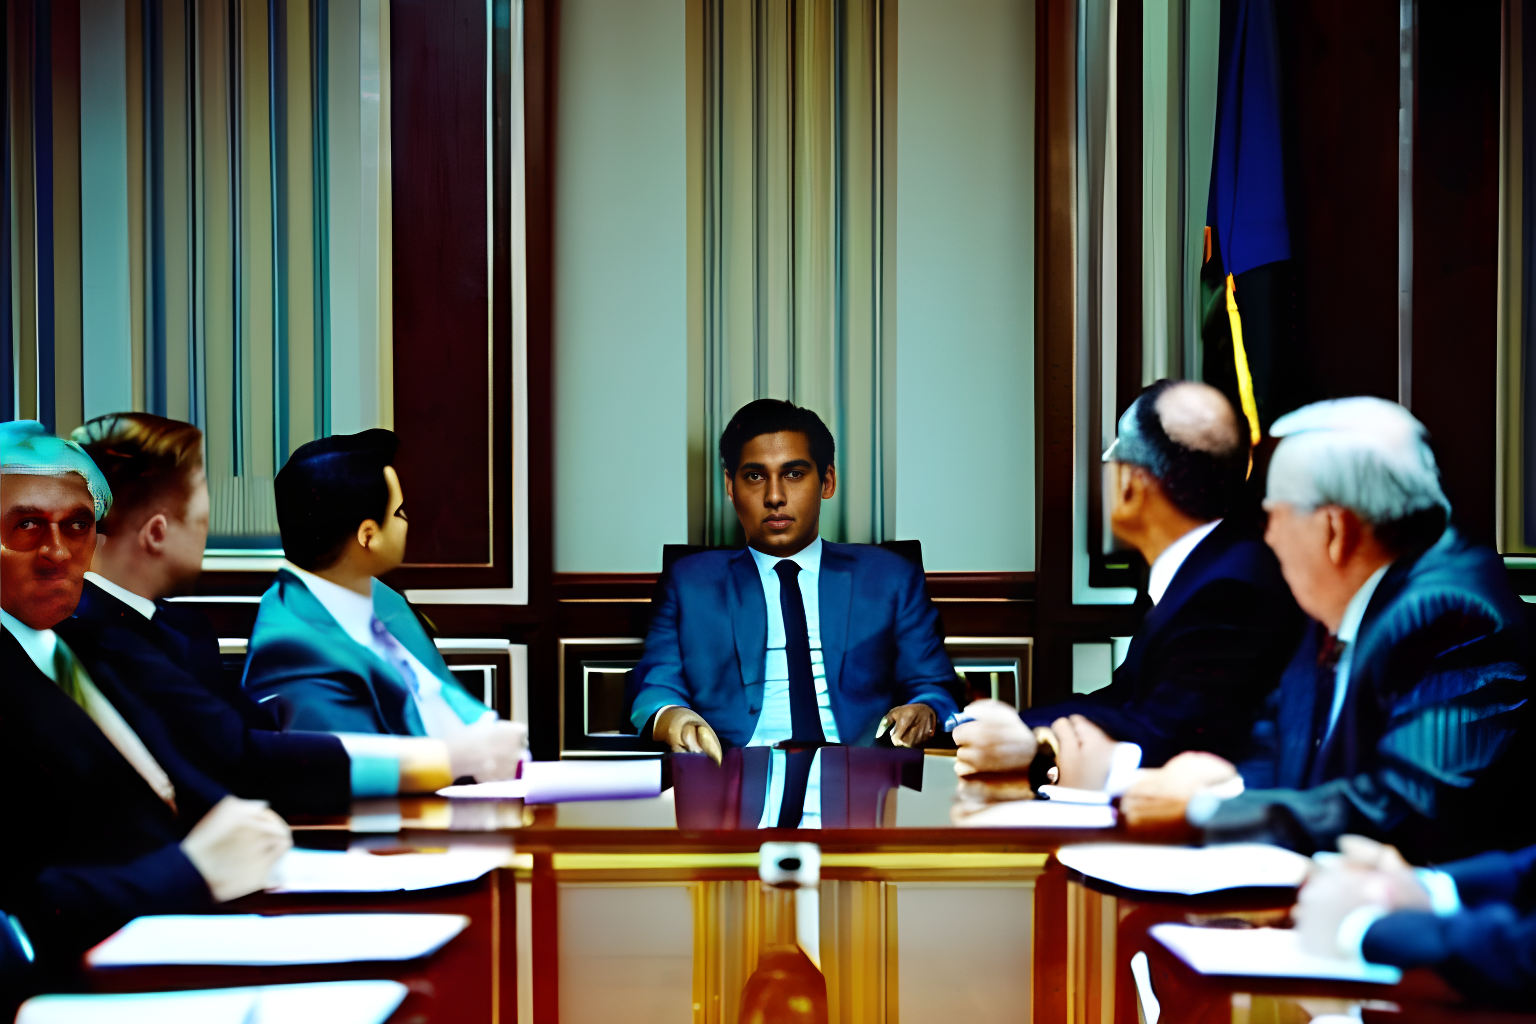 men in suits sitting in a conference room